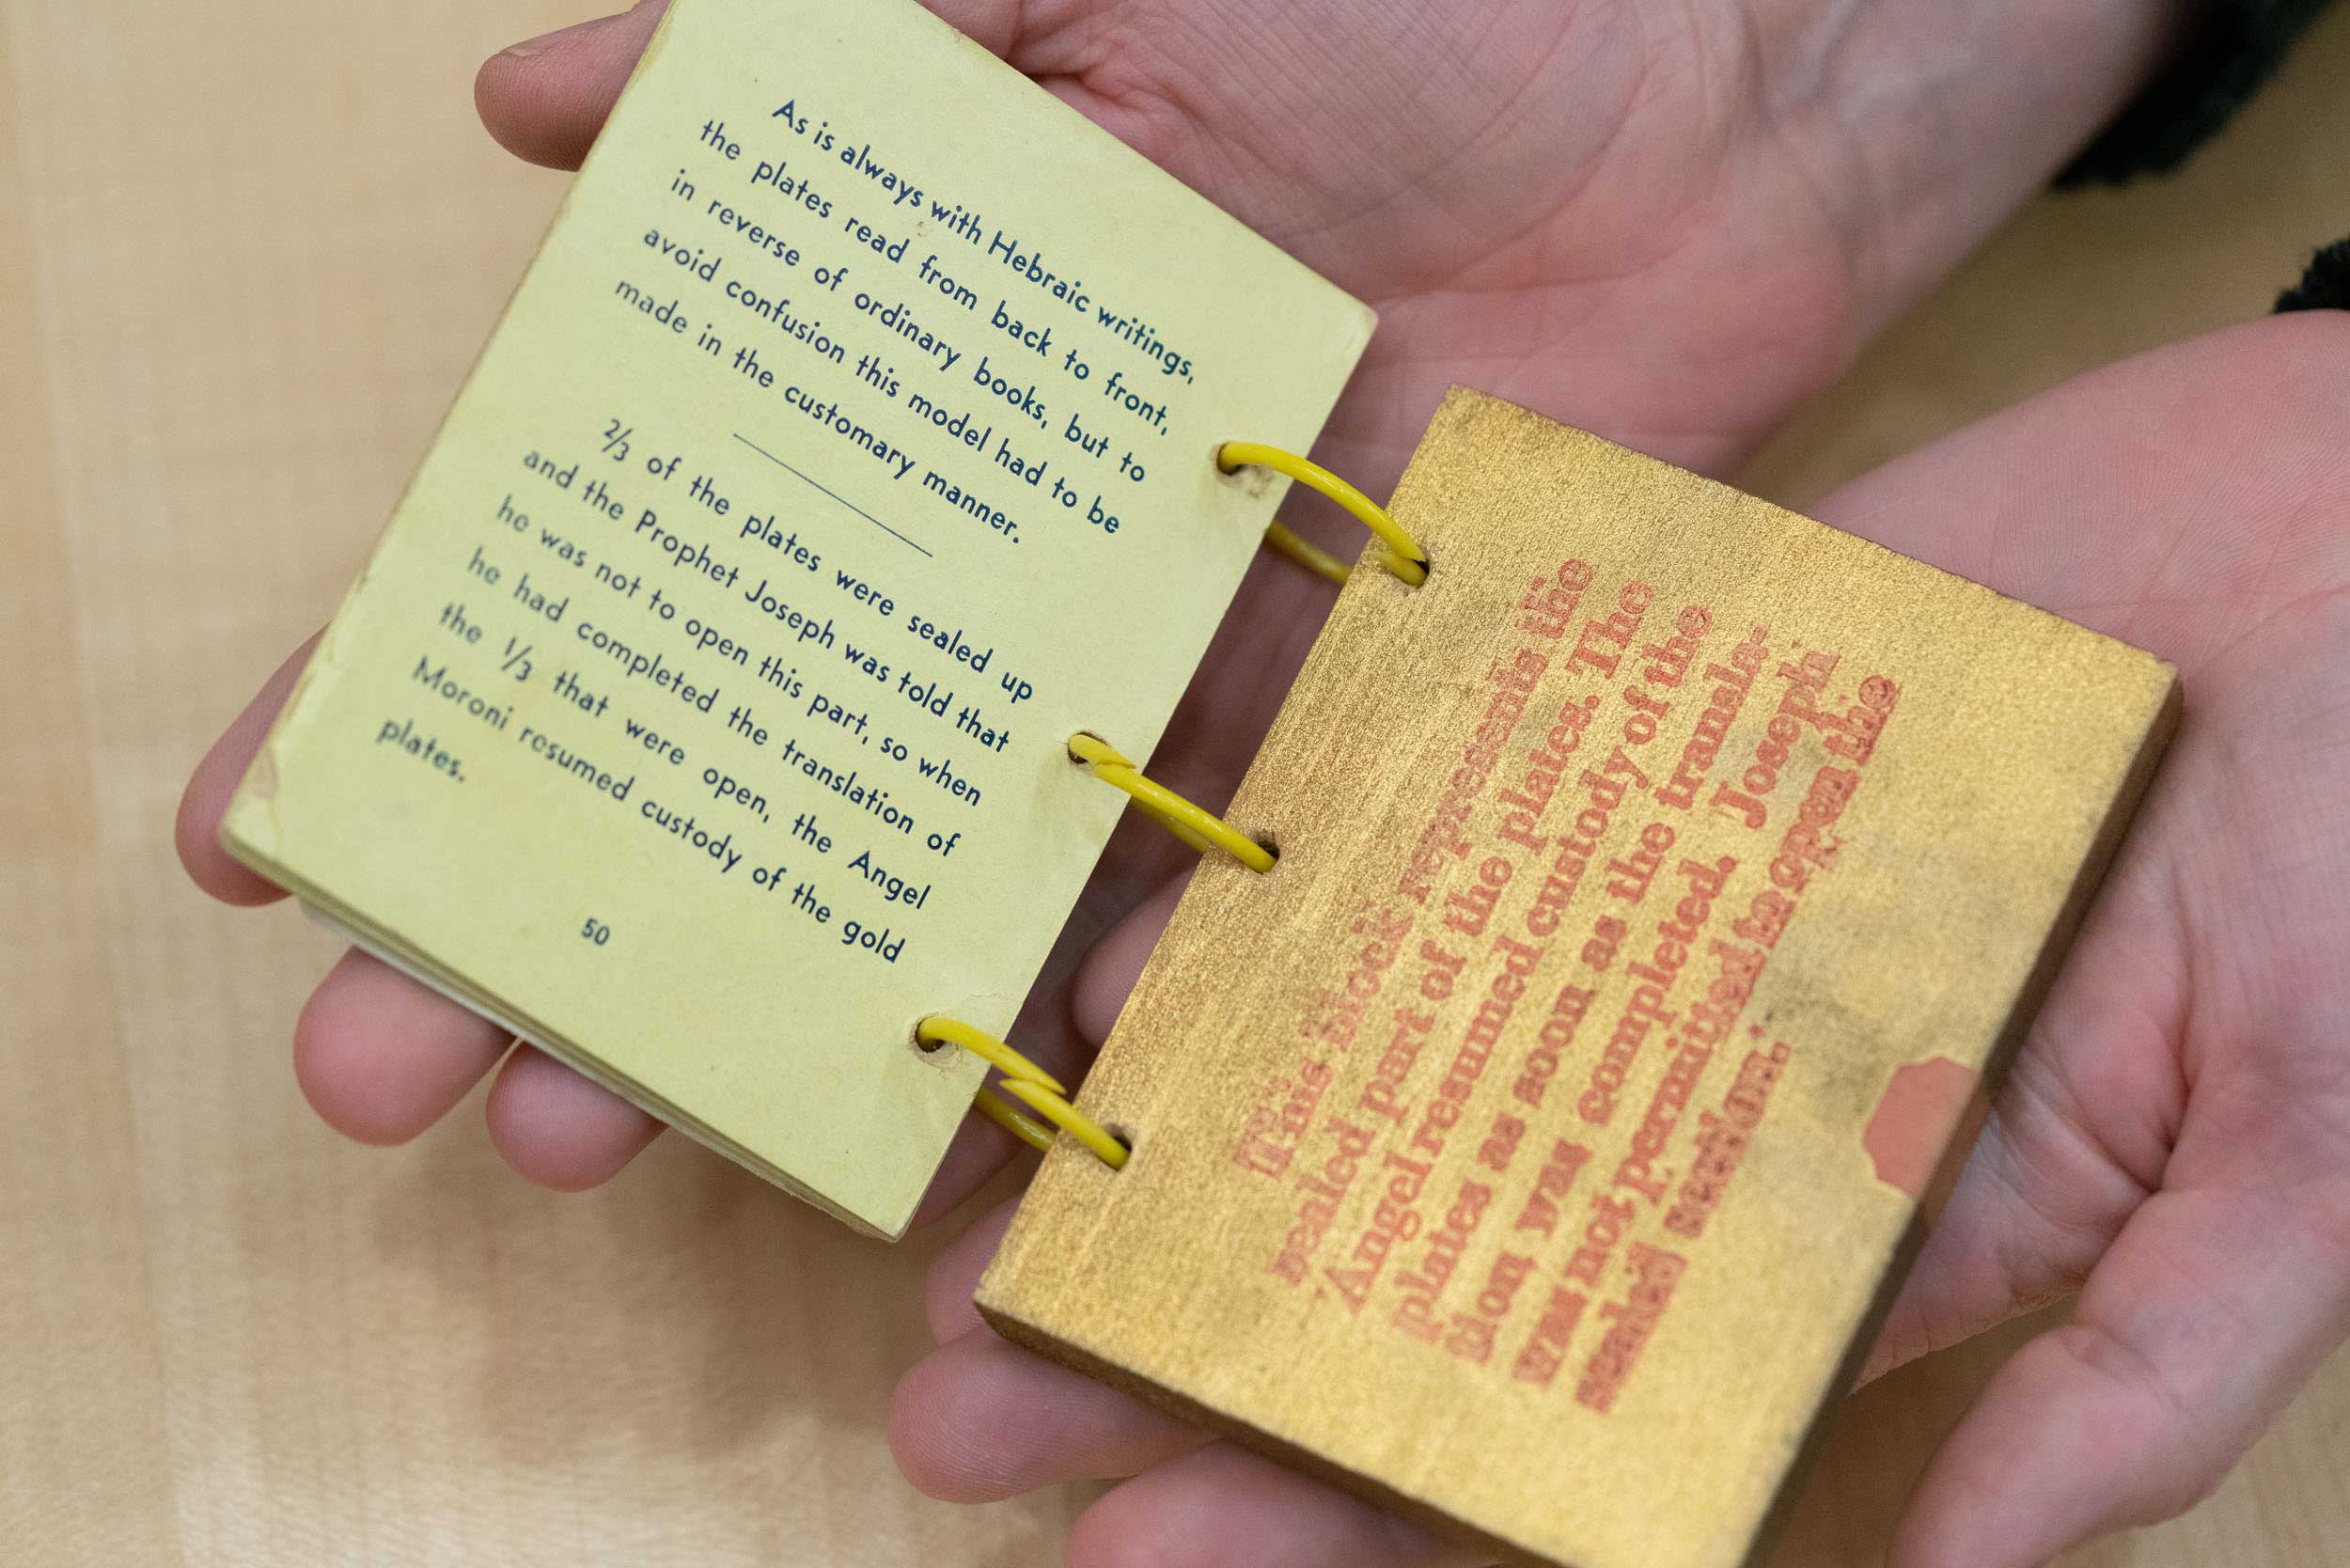 Mini book opened in a persons hands